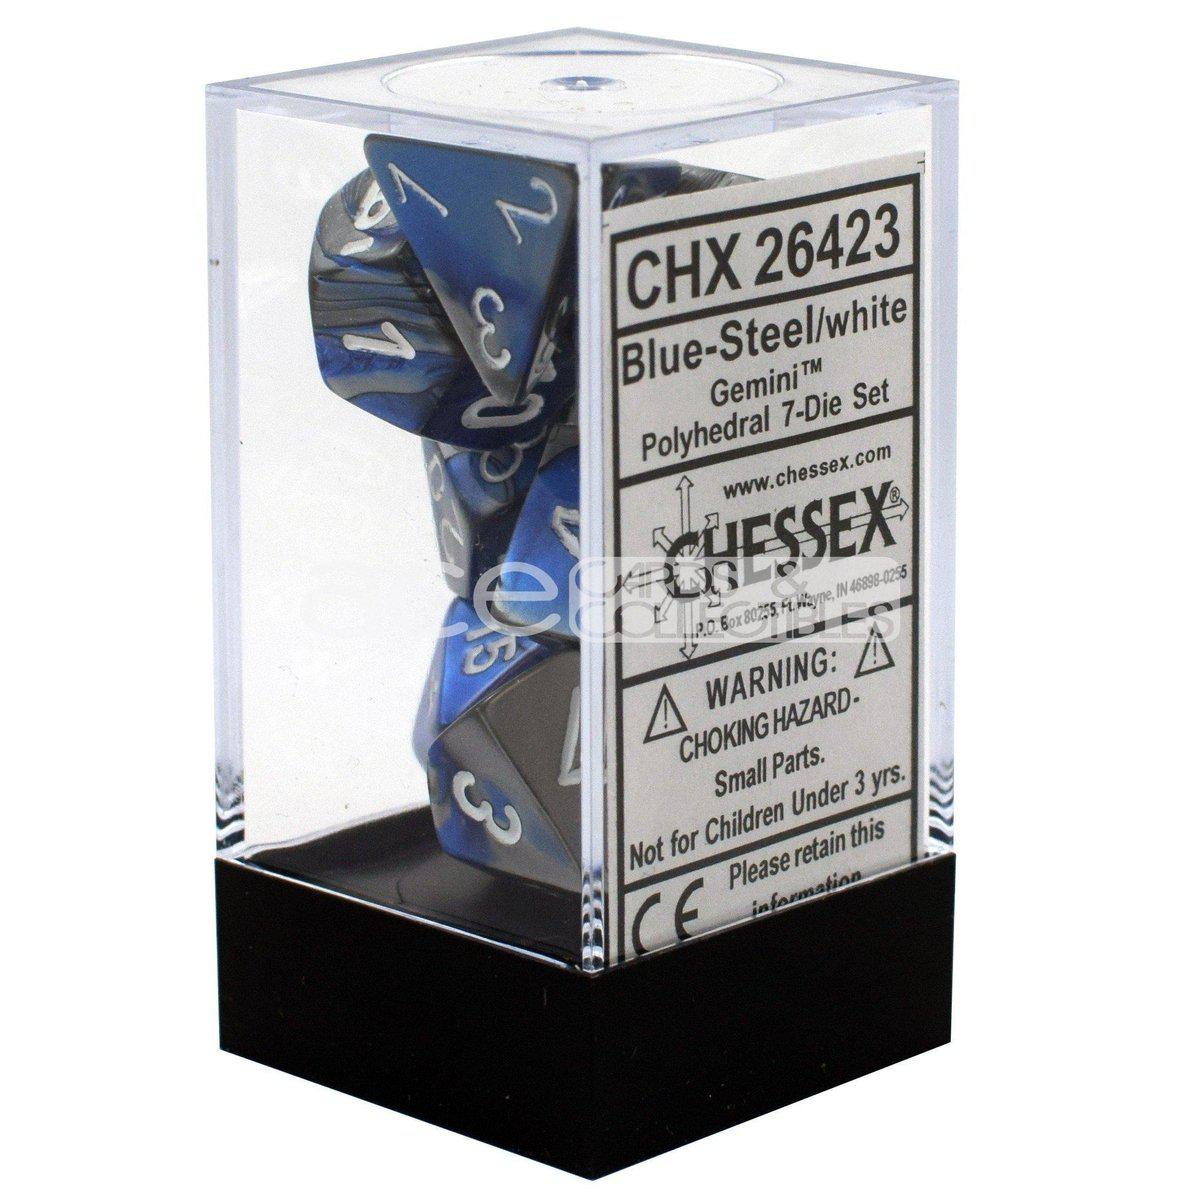 Chessex Gemini™ Polyhedral 7pcs Dice (Blue-Steel/White) [CHX26423]-Chessex-Ace Cards & Collectibles